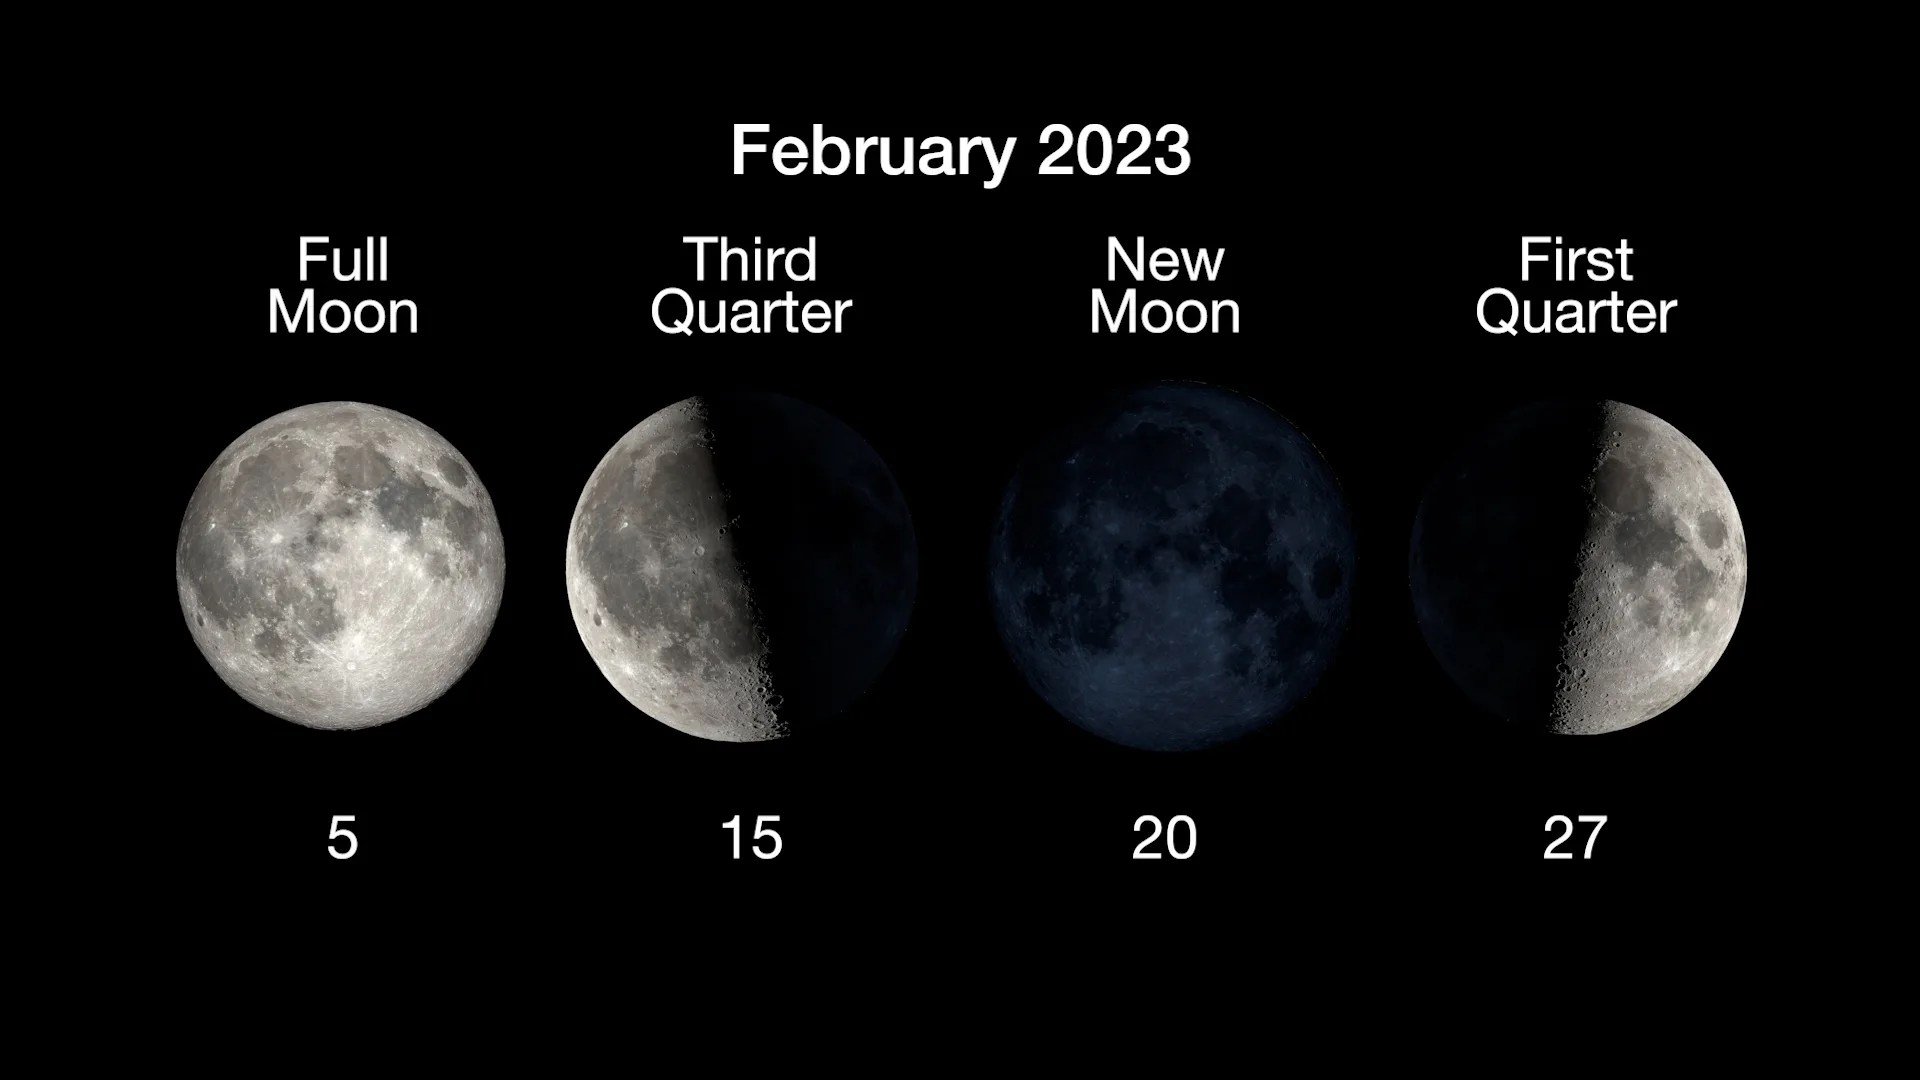 February 2023: The Next Full Moon is the Snow, Storm, or Hunger Moon